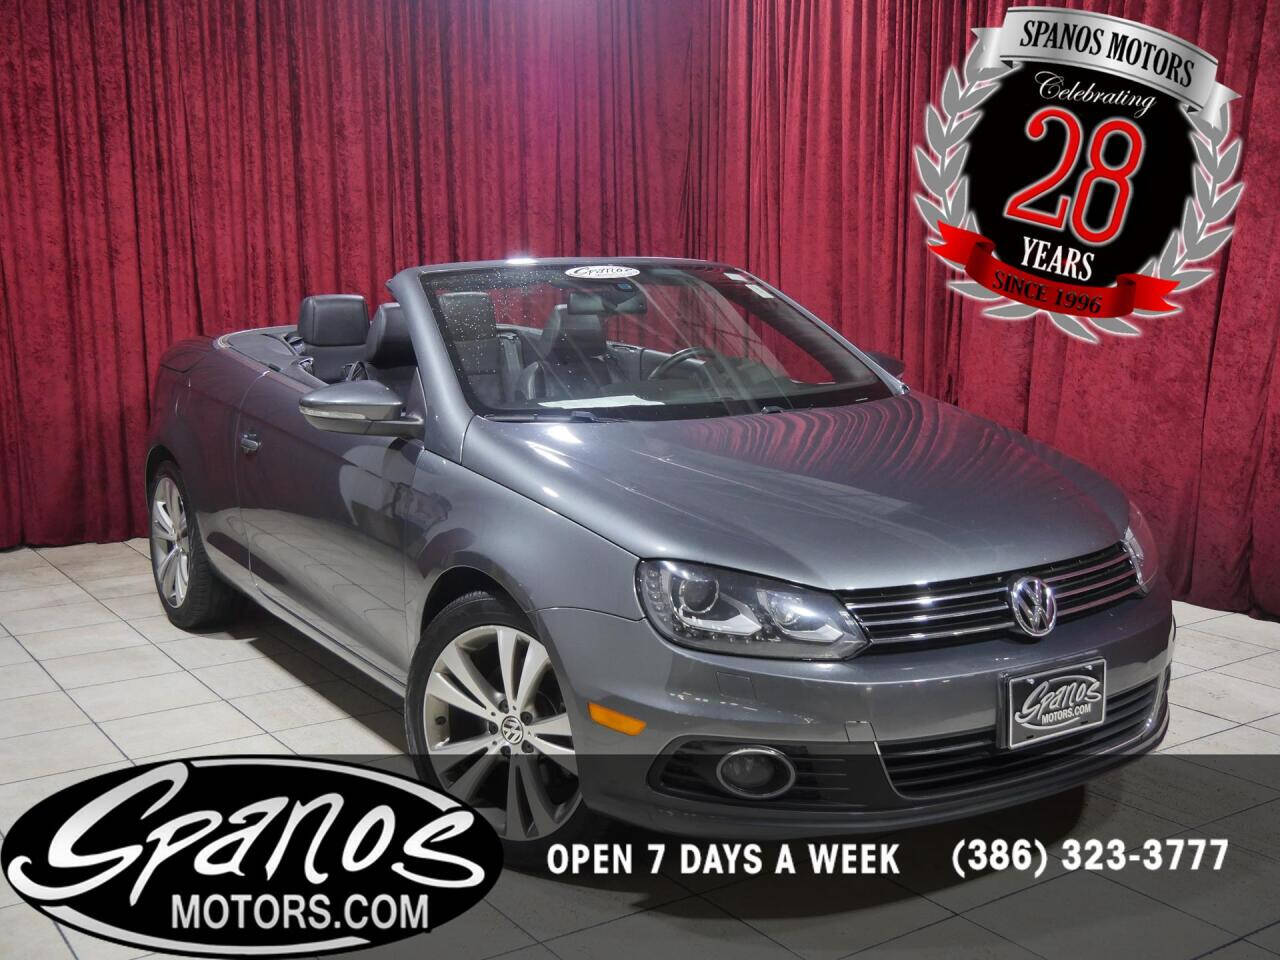 2010 Volkswagen Eos Review, Pricing, & Pictures